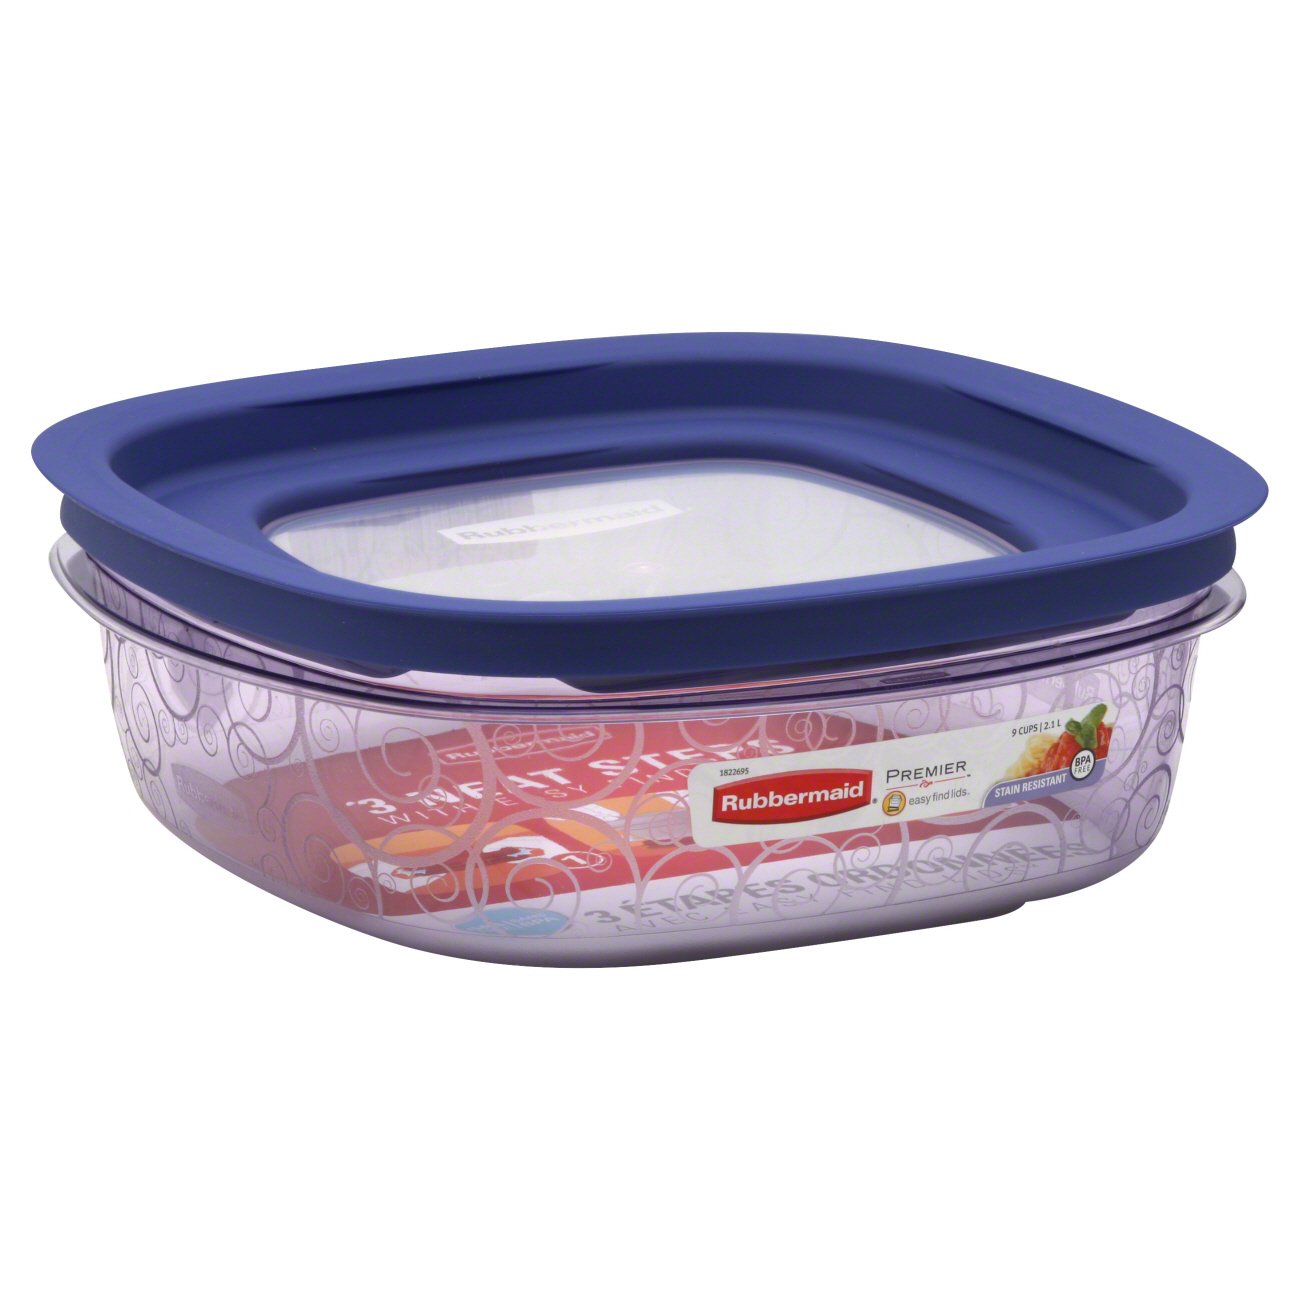 Rubbermaid Premier Easy Find Lids Food Storage Container, 2 Cup